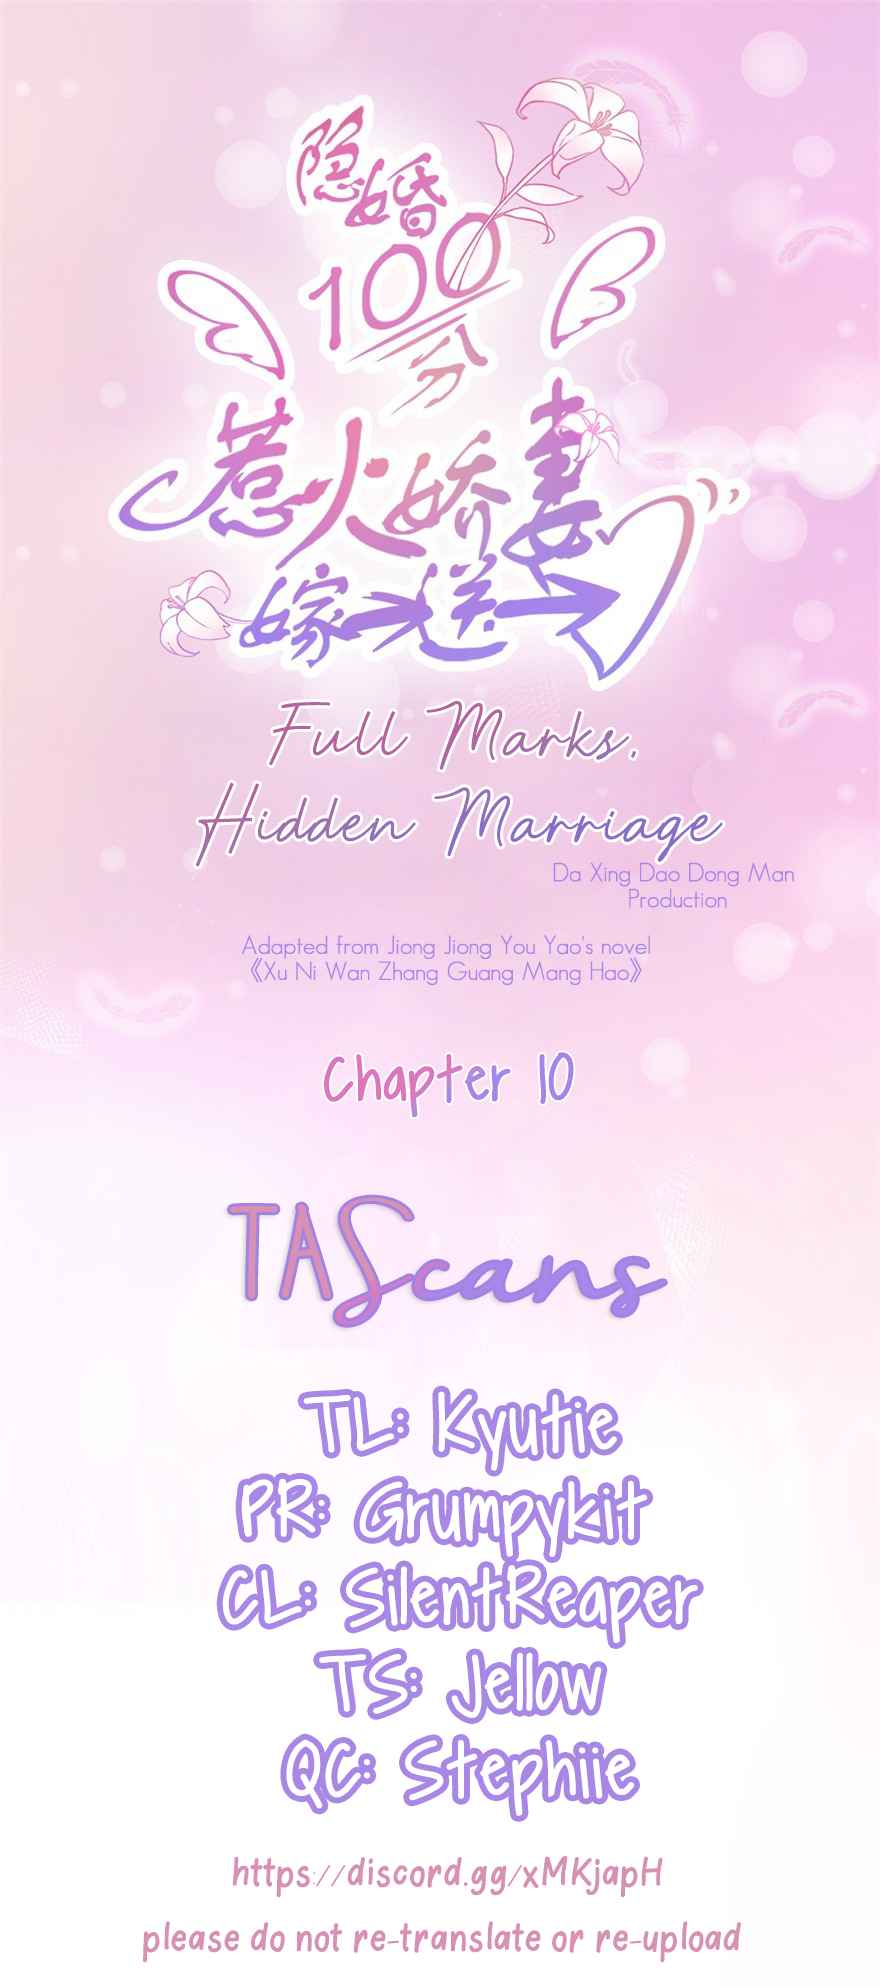 Full Marks, Hidden Marriage (大行道动漫) Ch. 10 Let's Justify It!